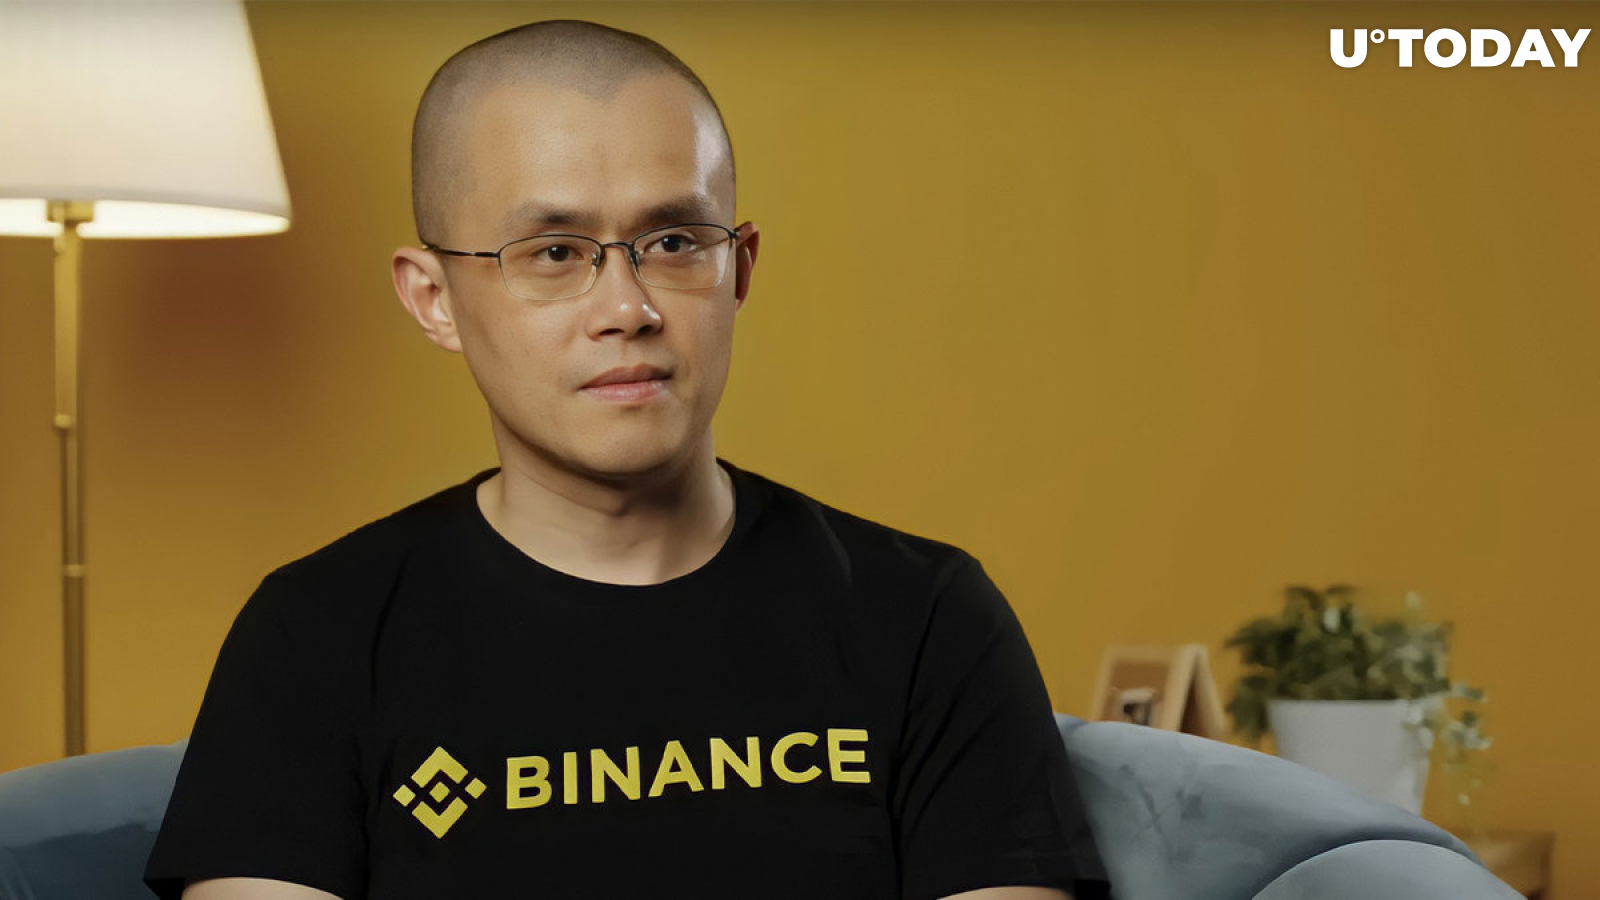 CZ Trading Against Binance Clients From 300 Accounts, CFTC Documents Claim